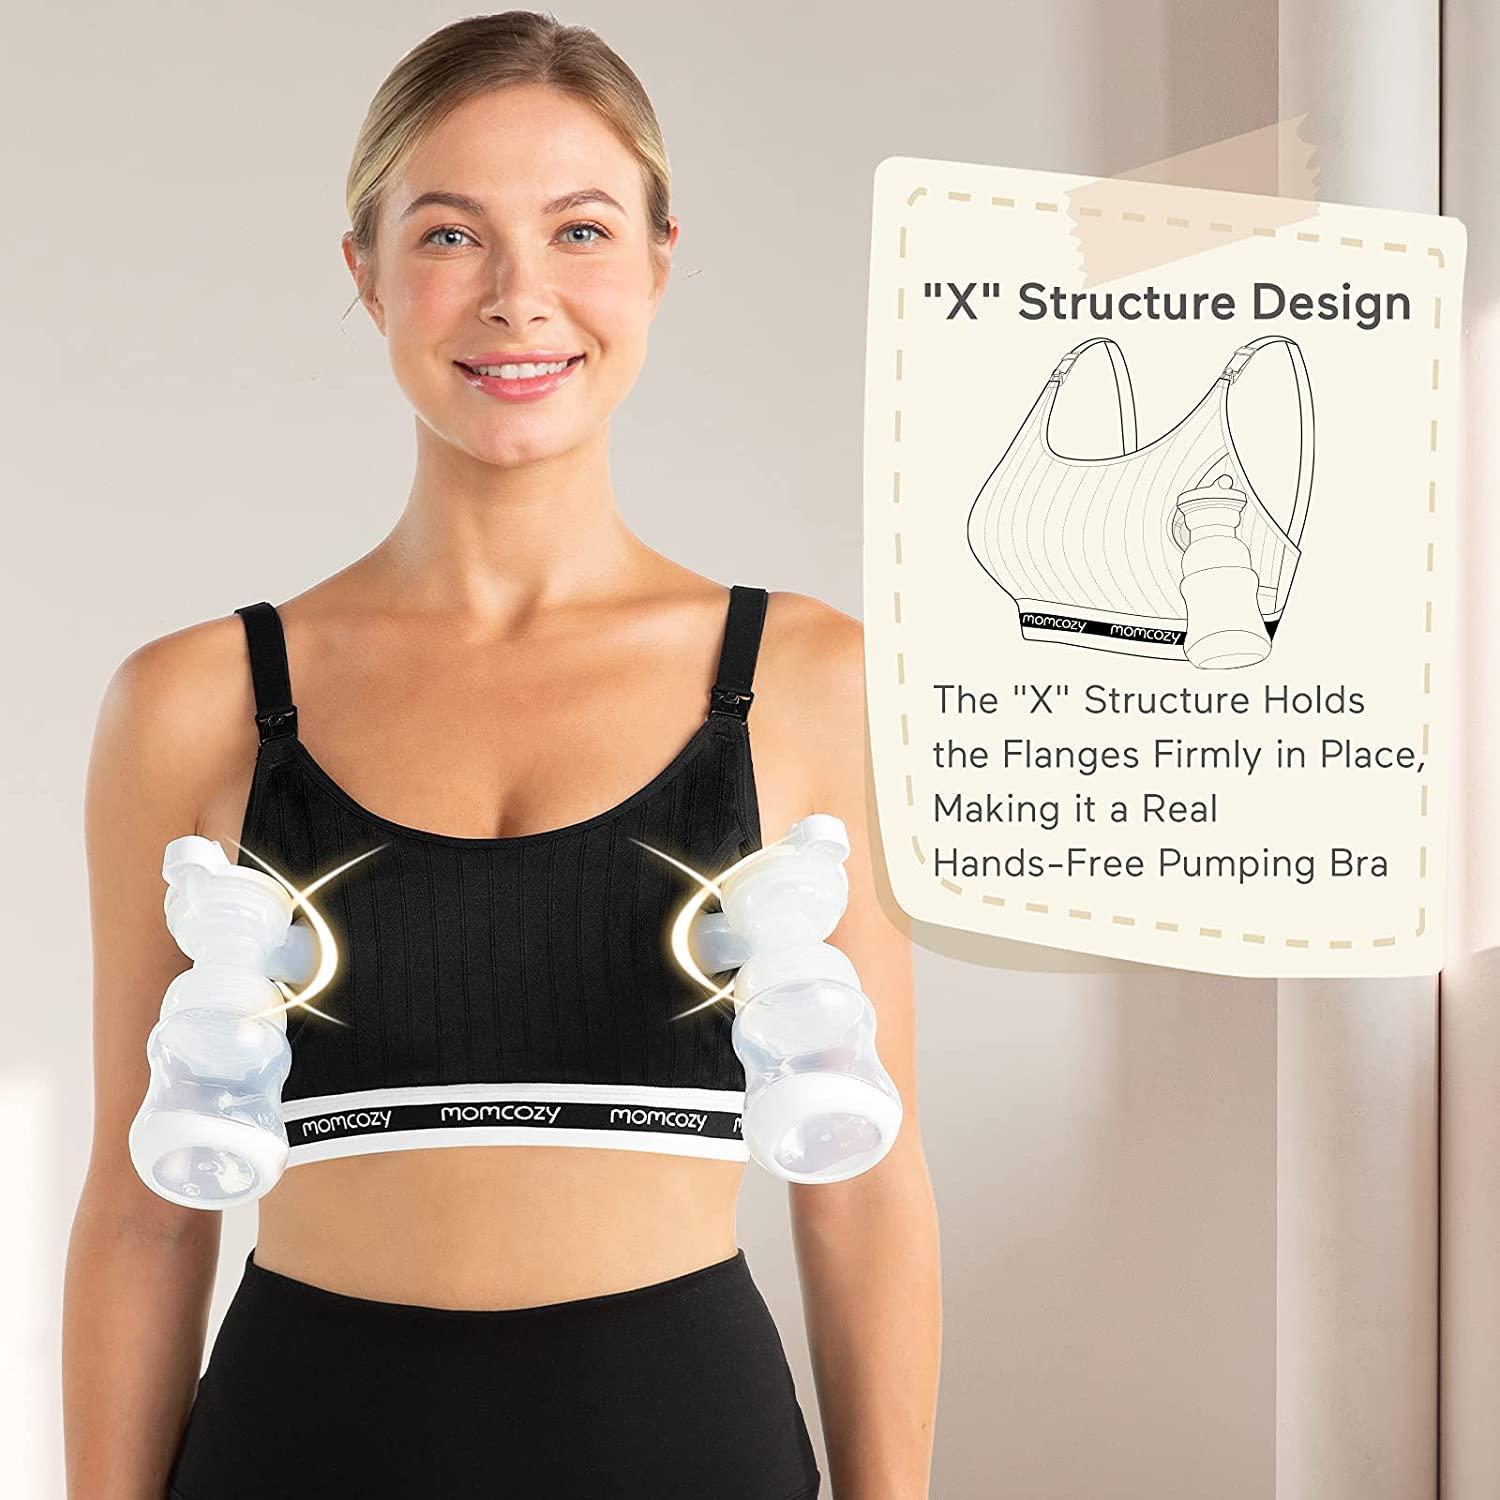 How to make a hands free pumping bra 